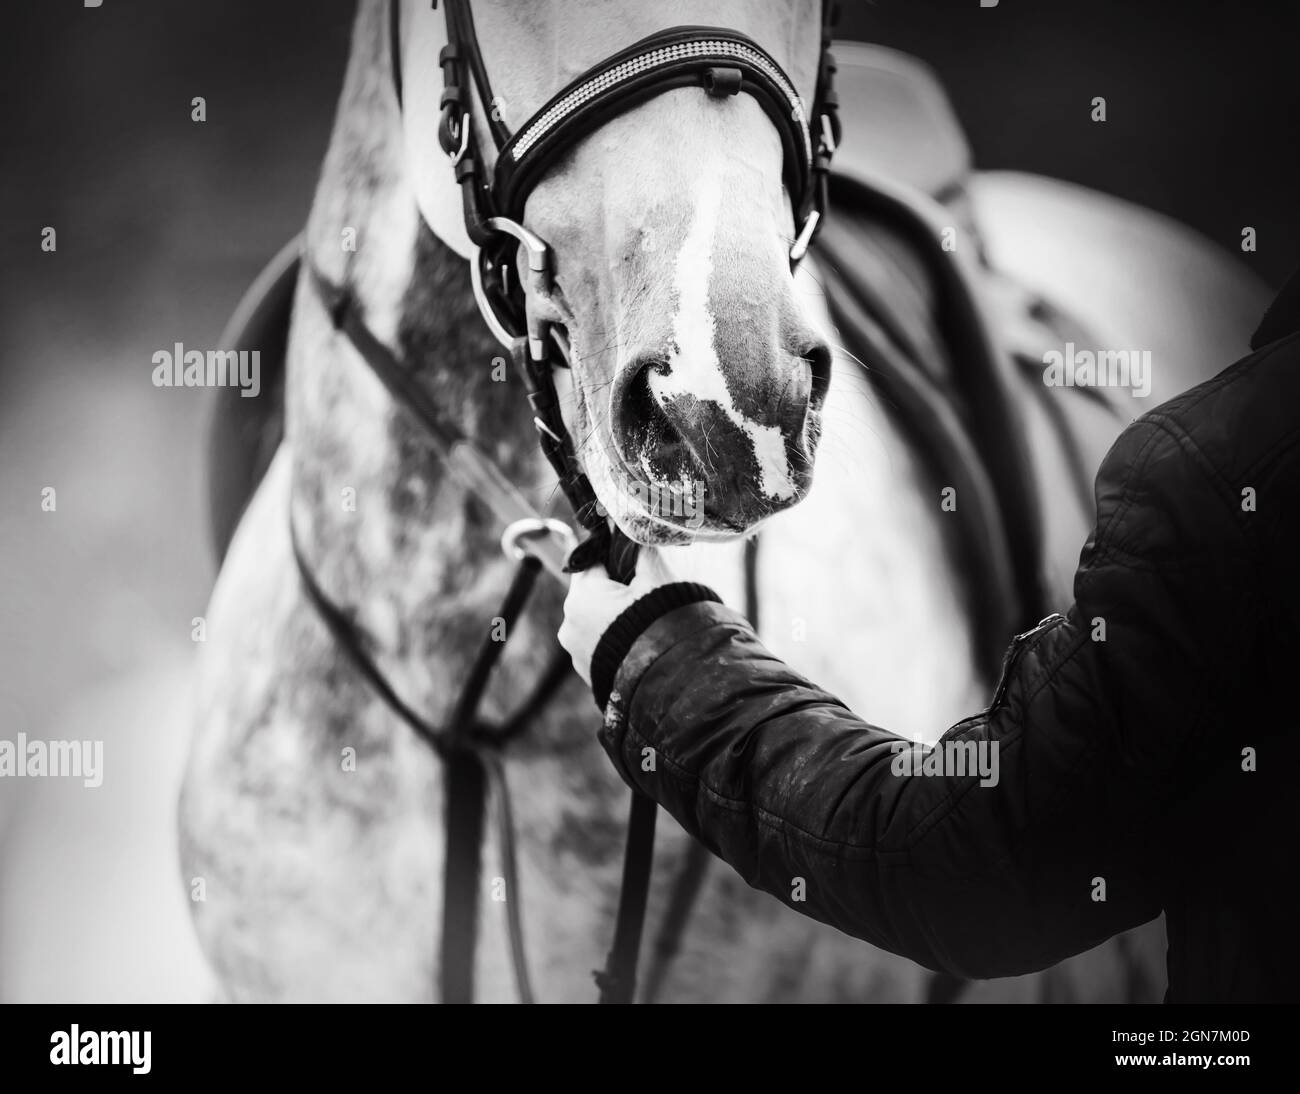 A black-and-white image of a dappled gray horse with a saddle on its back, which is held by a horse breeder by the bridle rein. Equestrian sports. Equ Stock Photo